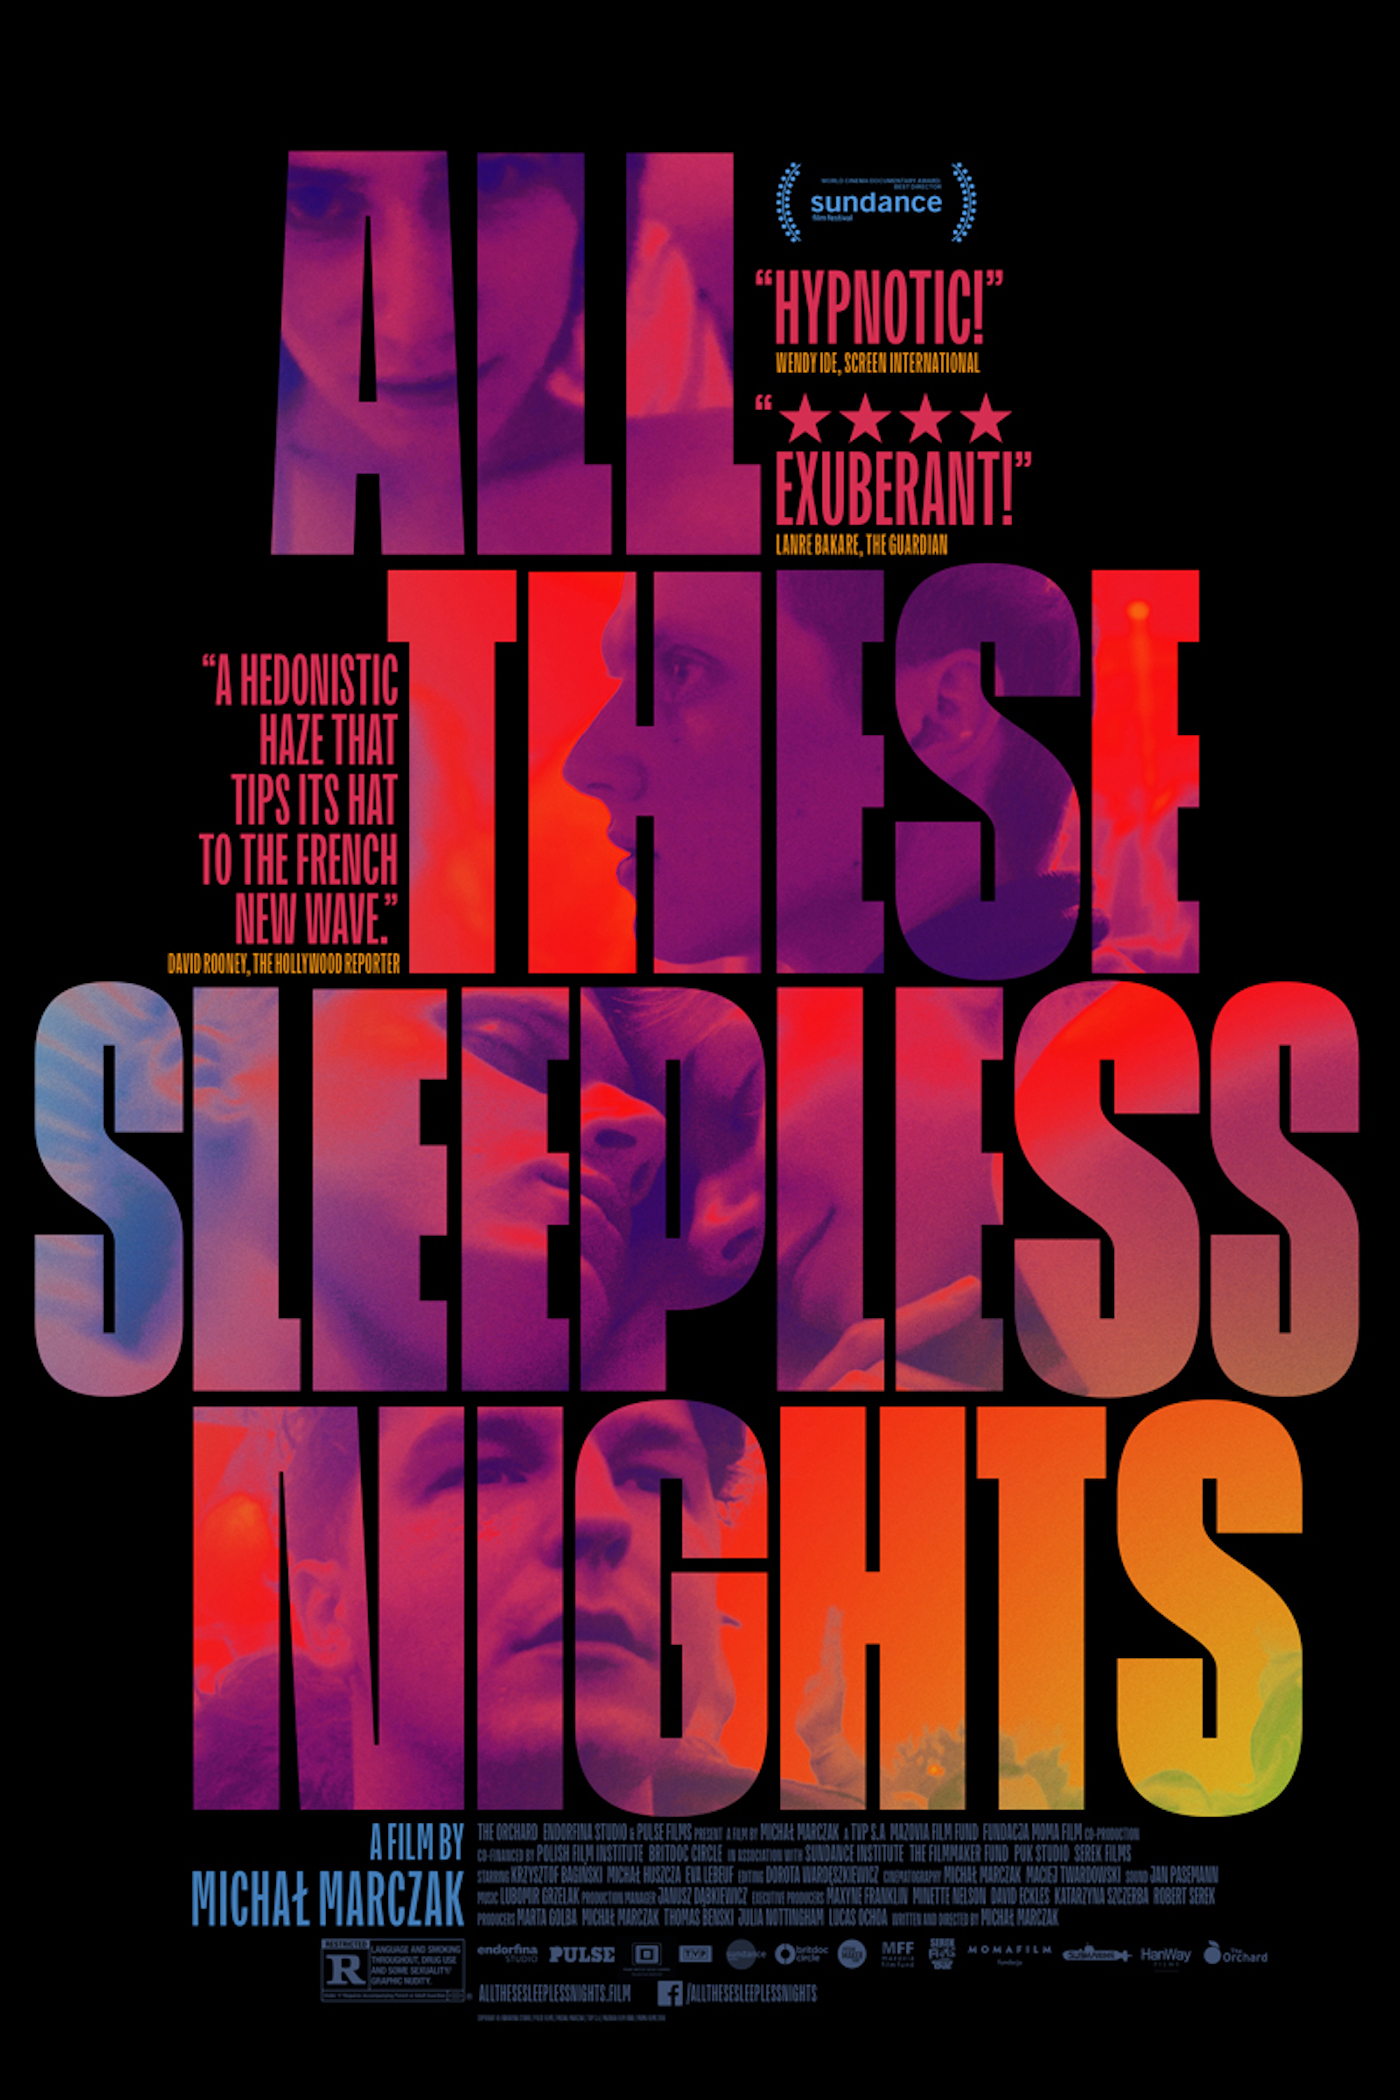 all these sleepless nights soundtrackzip